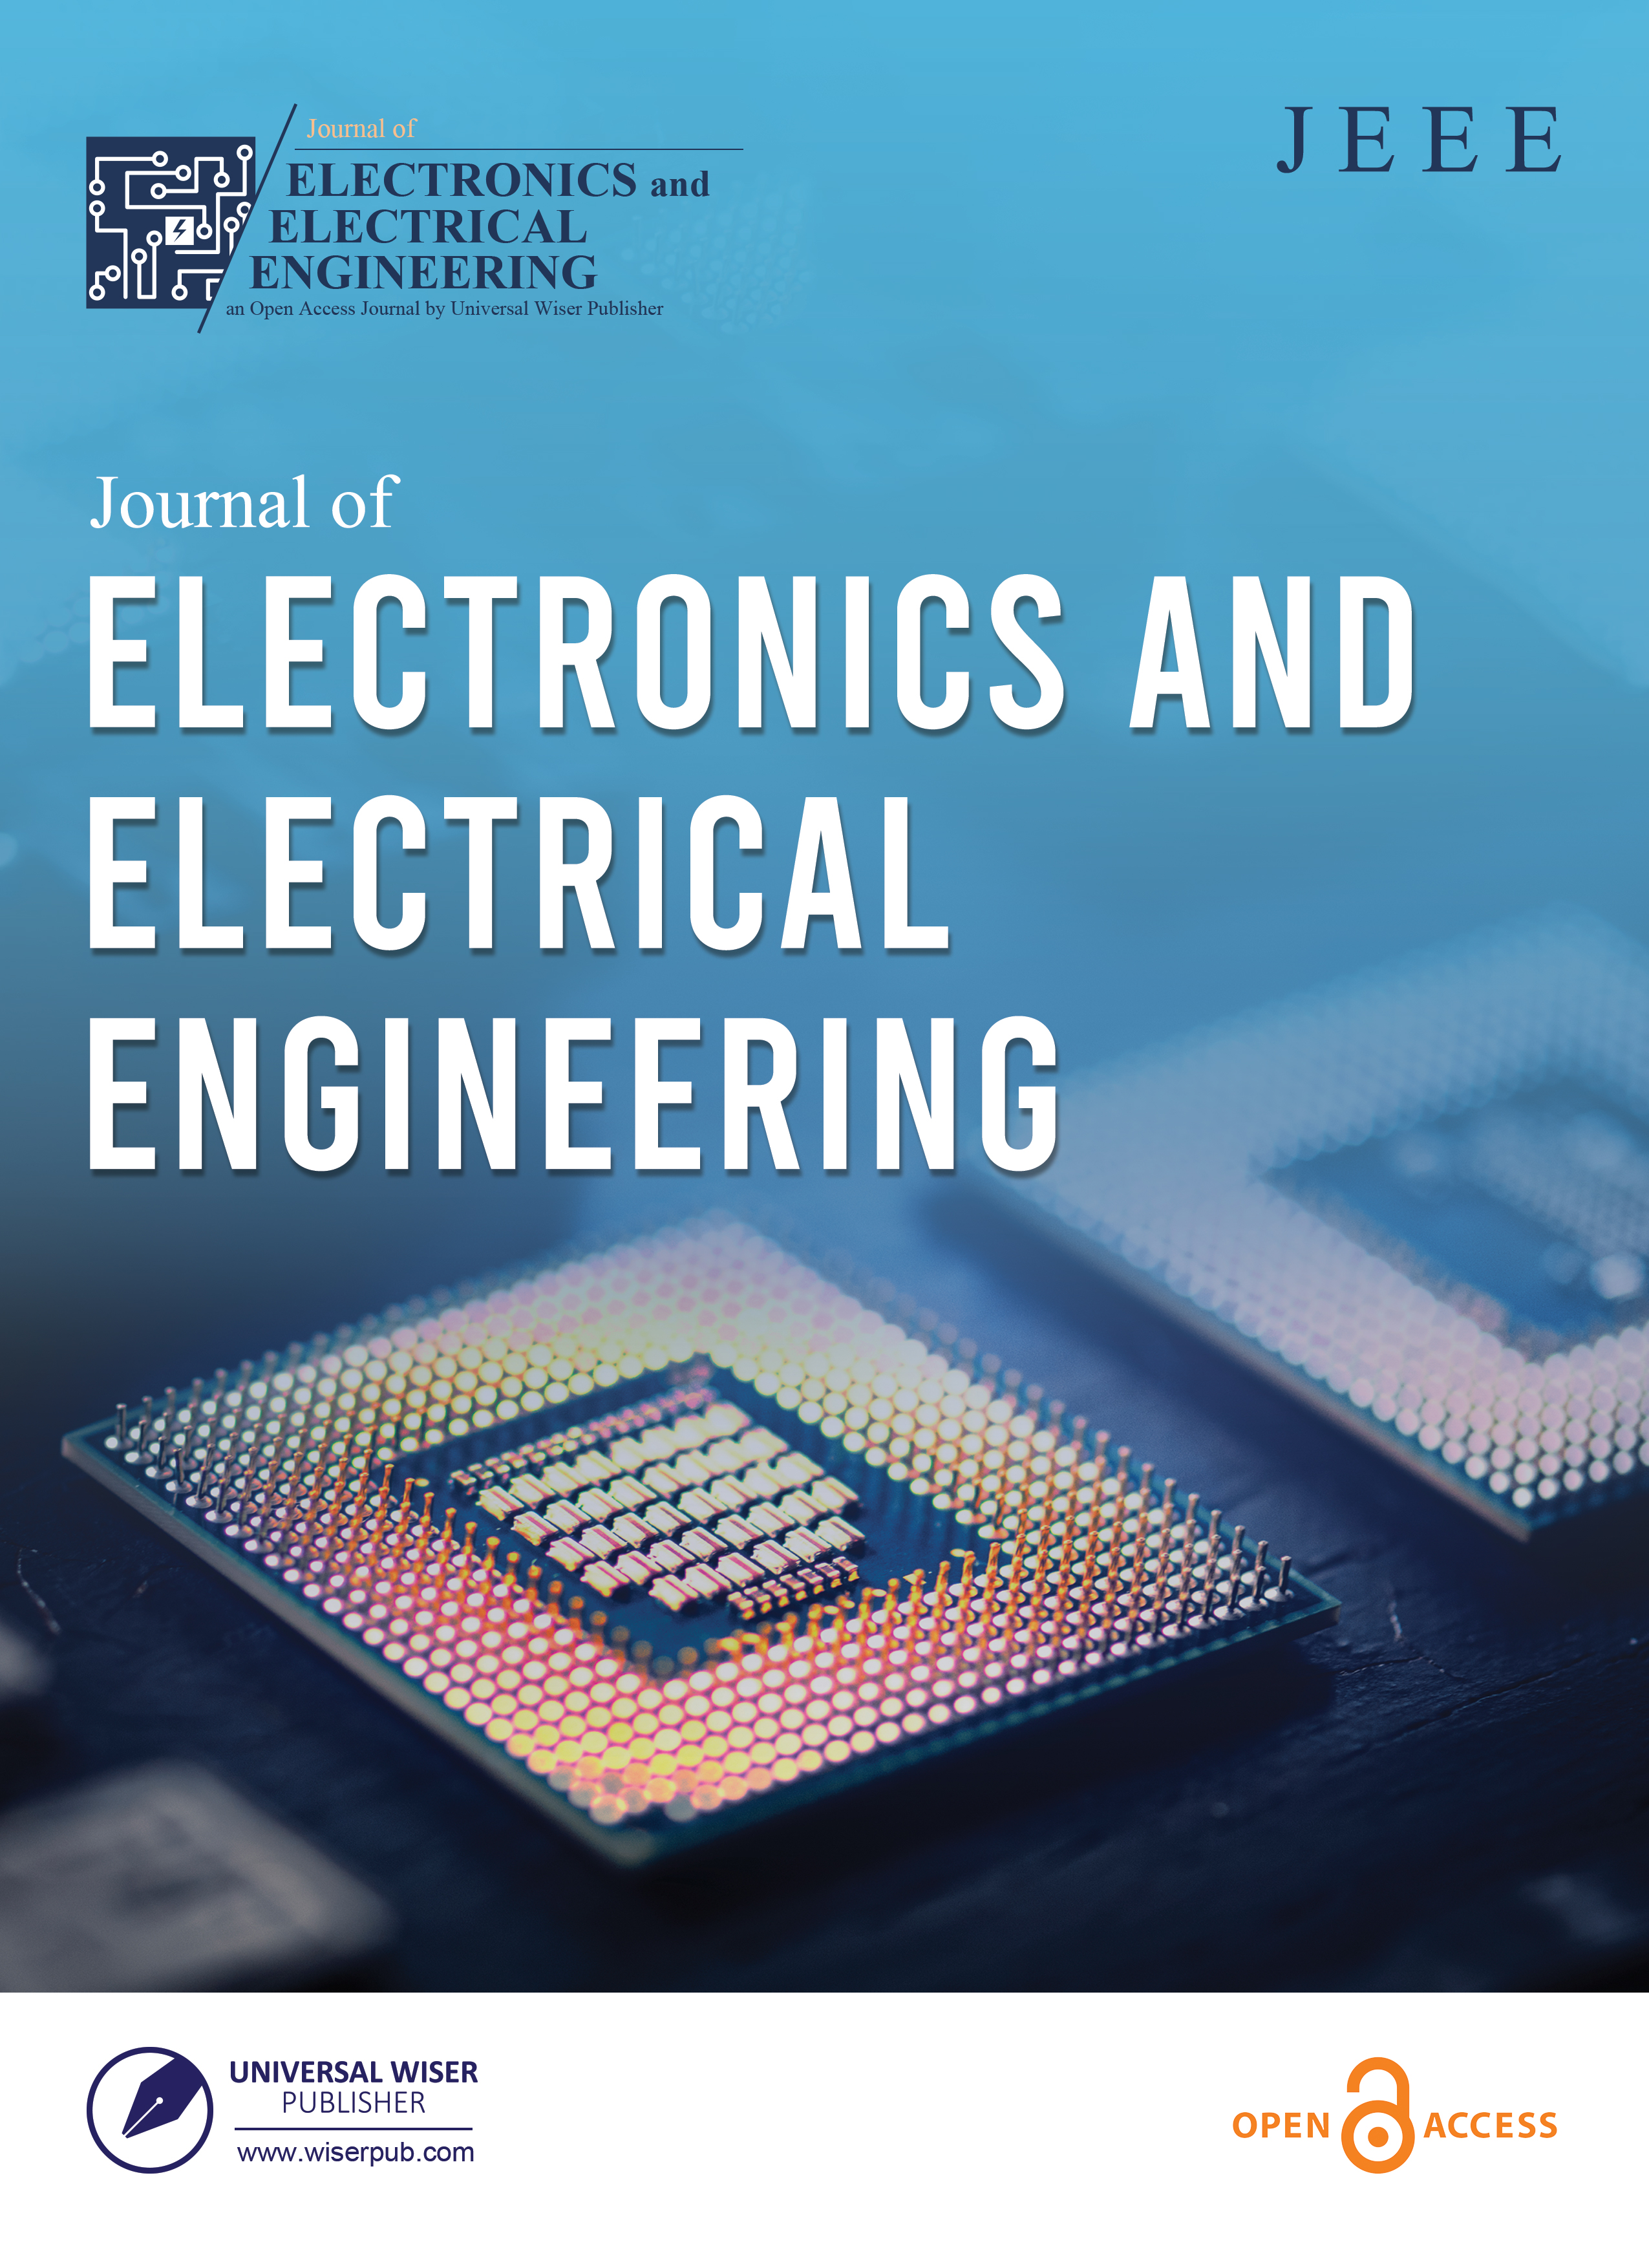  Journal of Electronics and Electrical Engineering